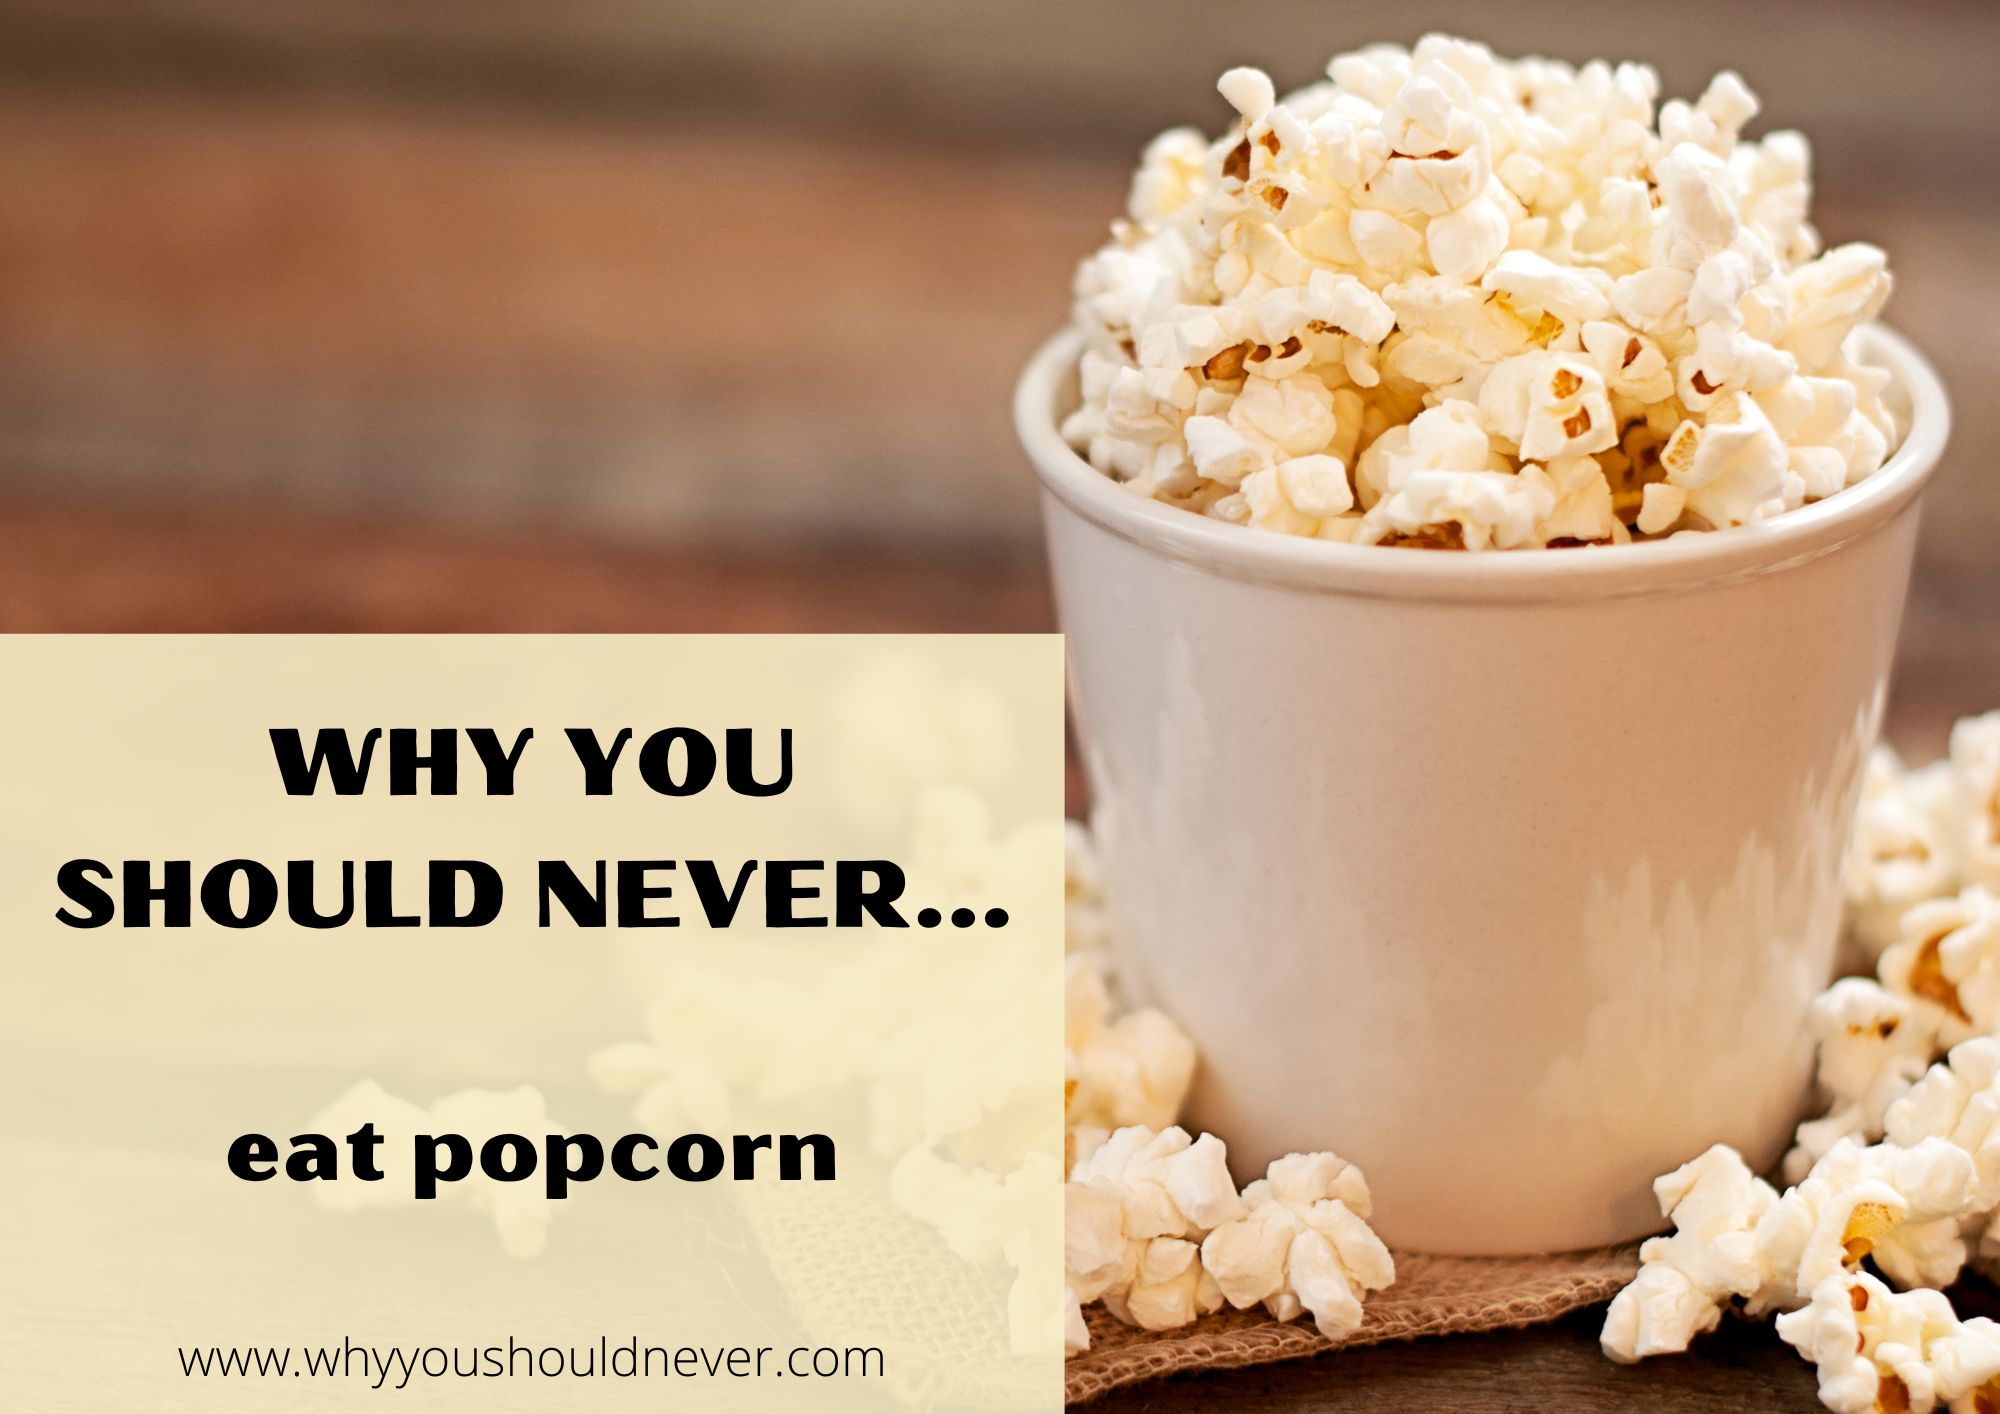 Why You Should Never Eat Popcorn